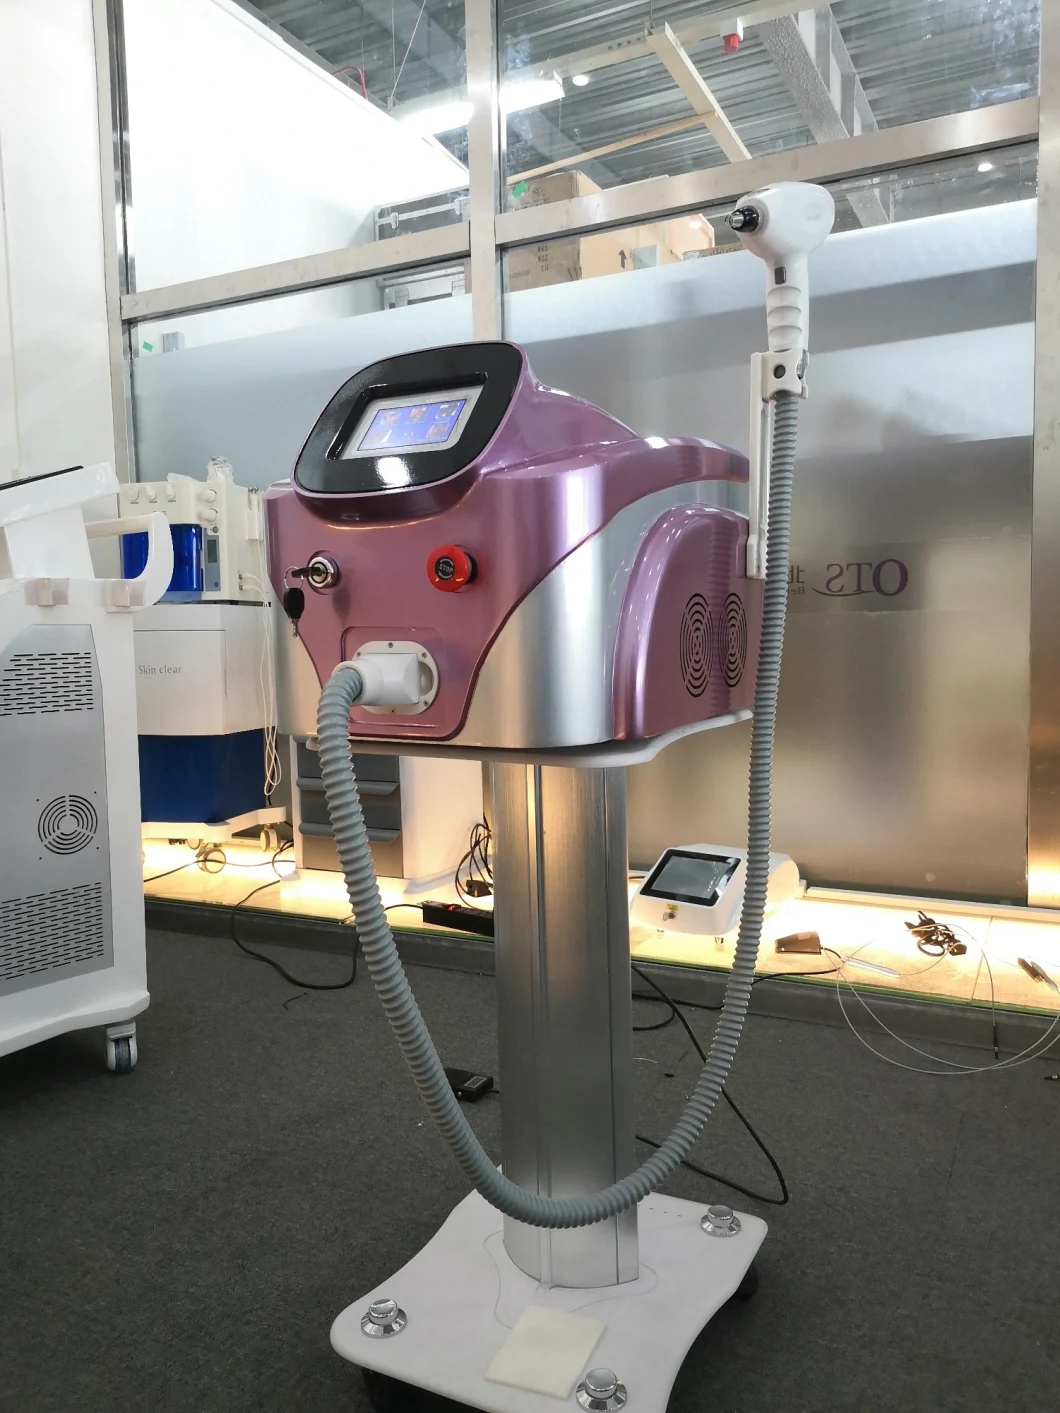 Multifunction Q-Switch ND YAG Laser Tattoo Removal Beauty Clinic Equipment